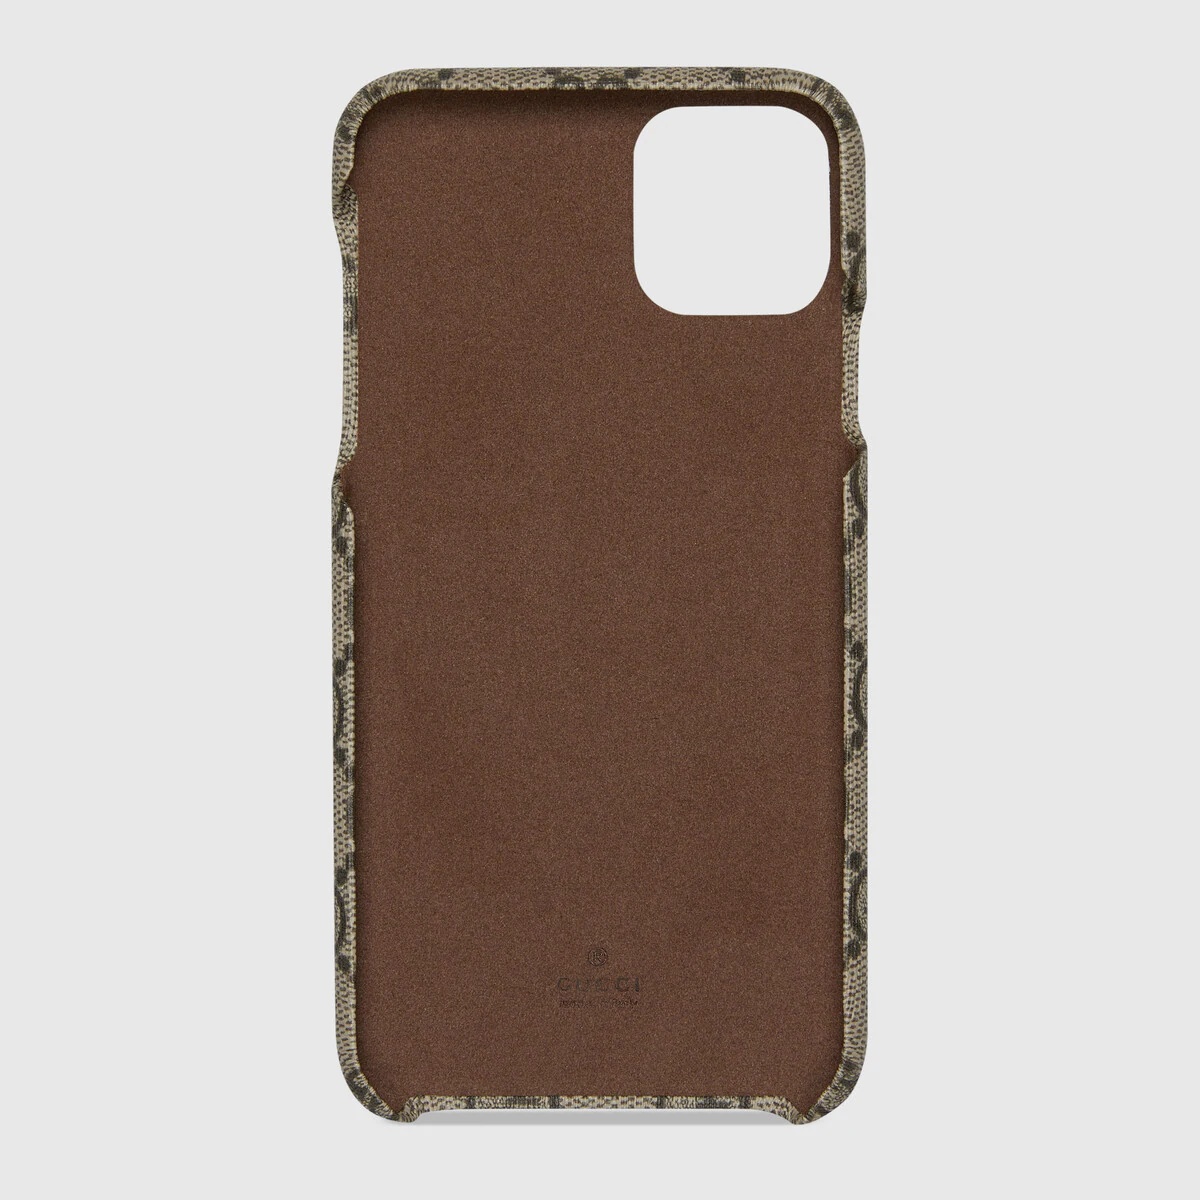 Ophidia case for iPhone 11 Pro Max - 2